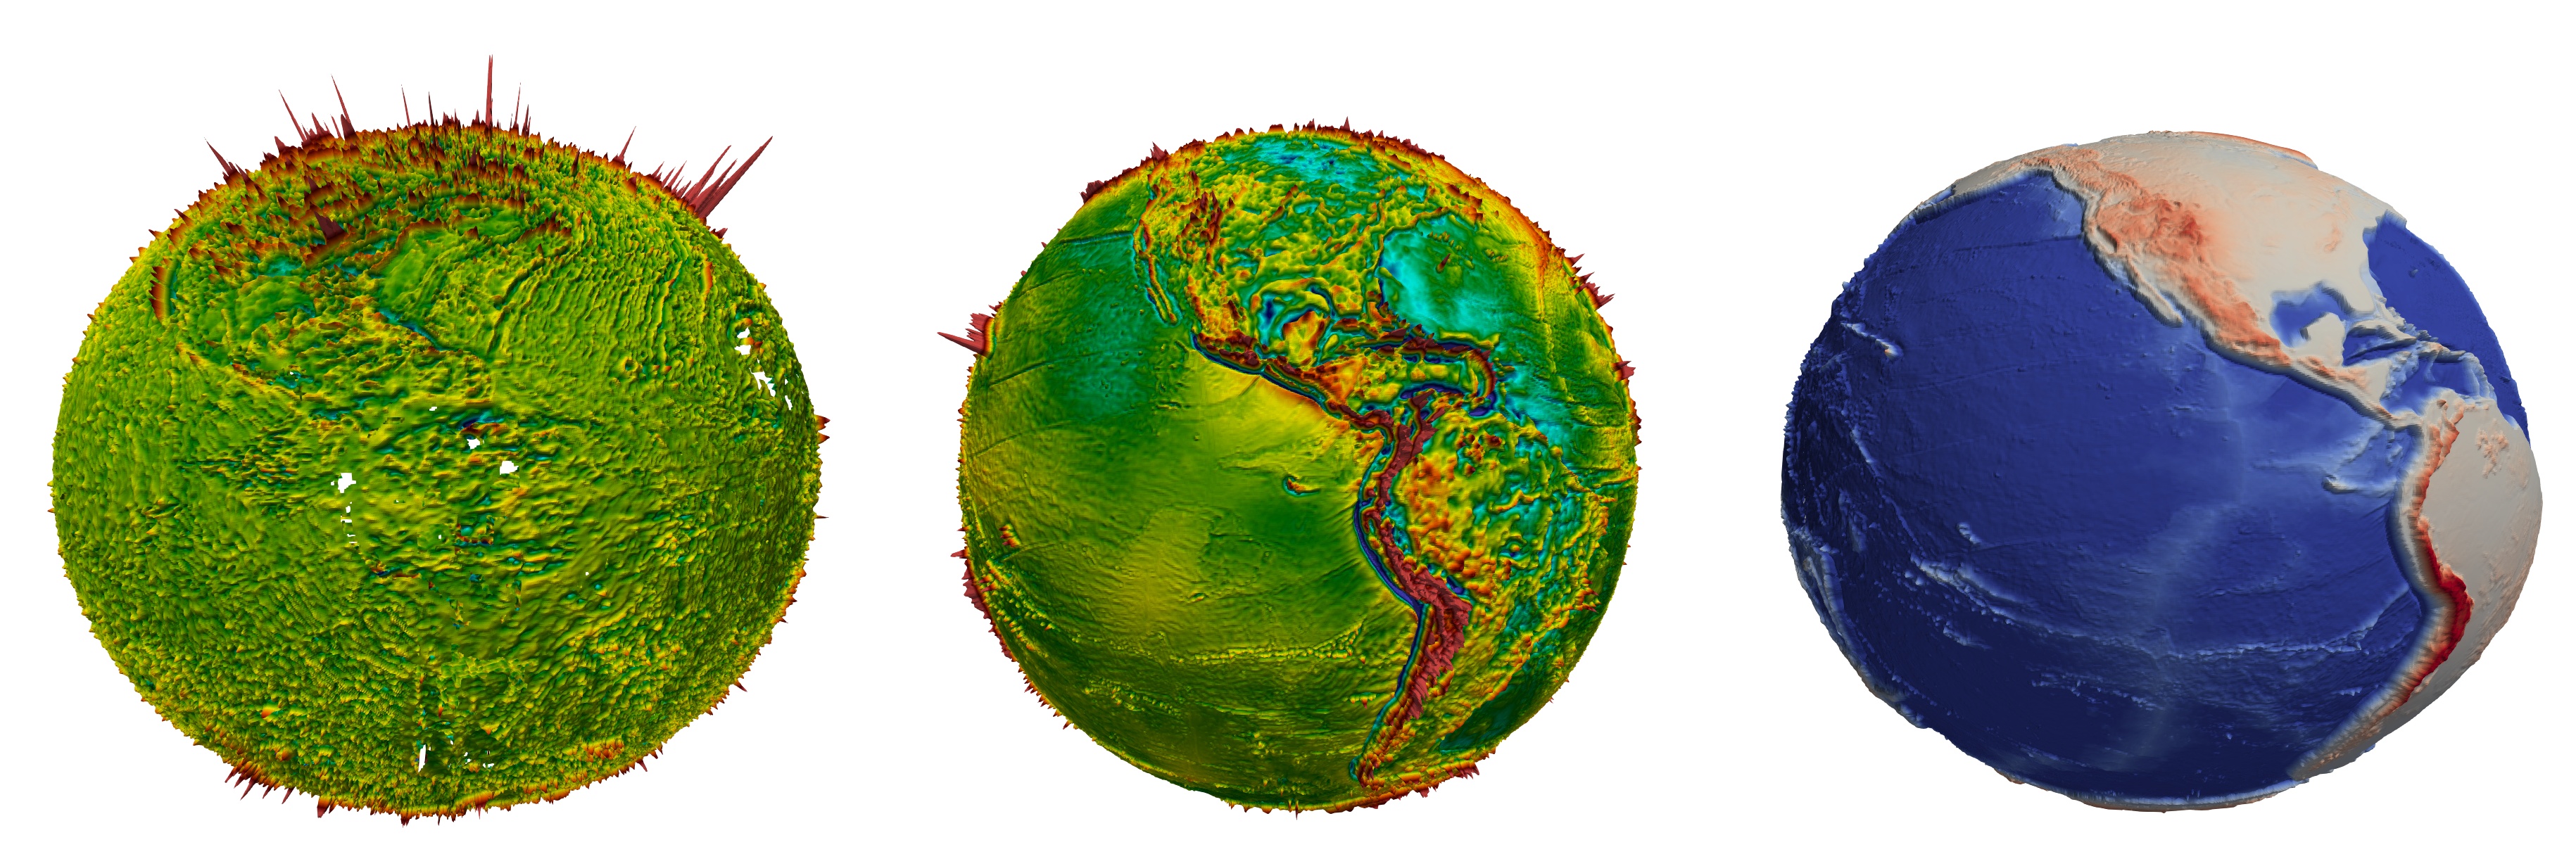 Earth Observation Data on the Globe